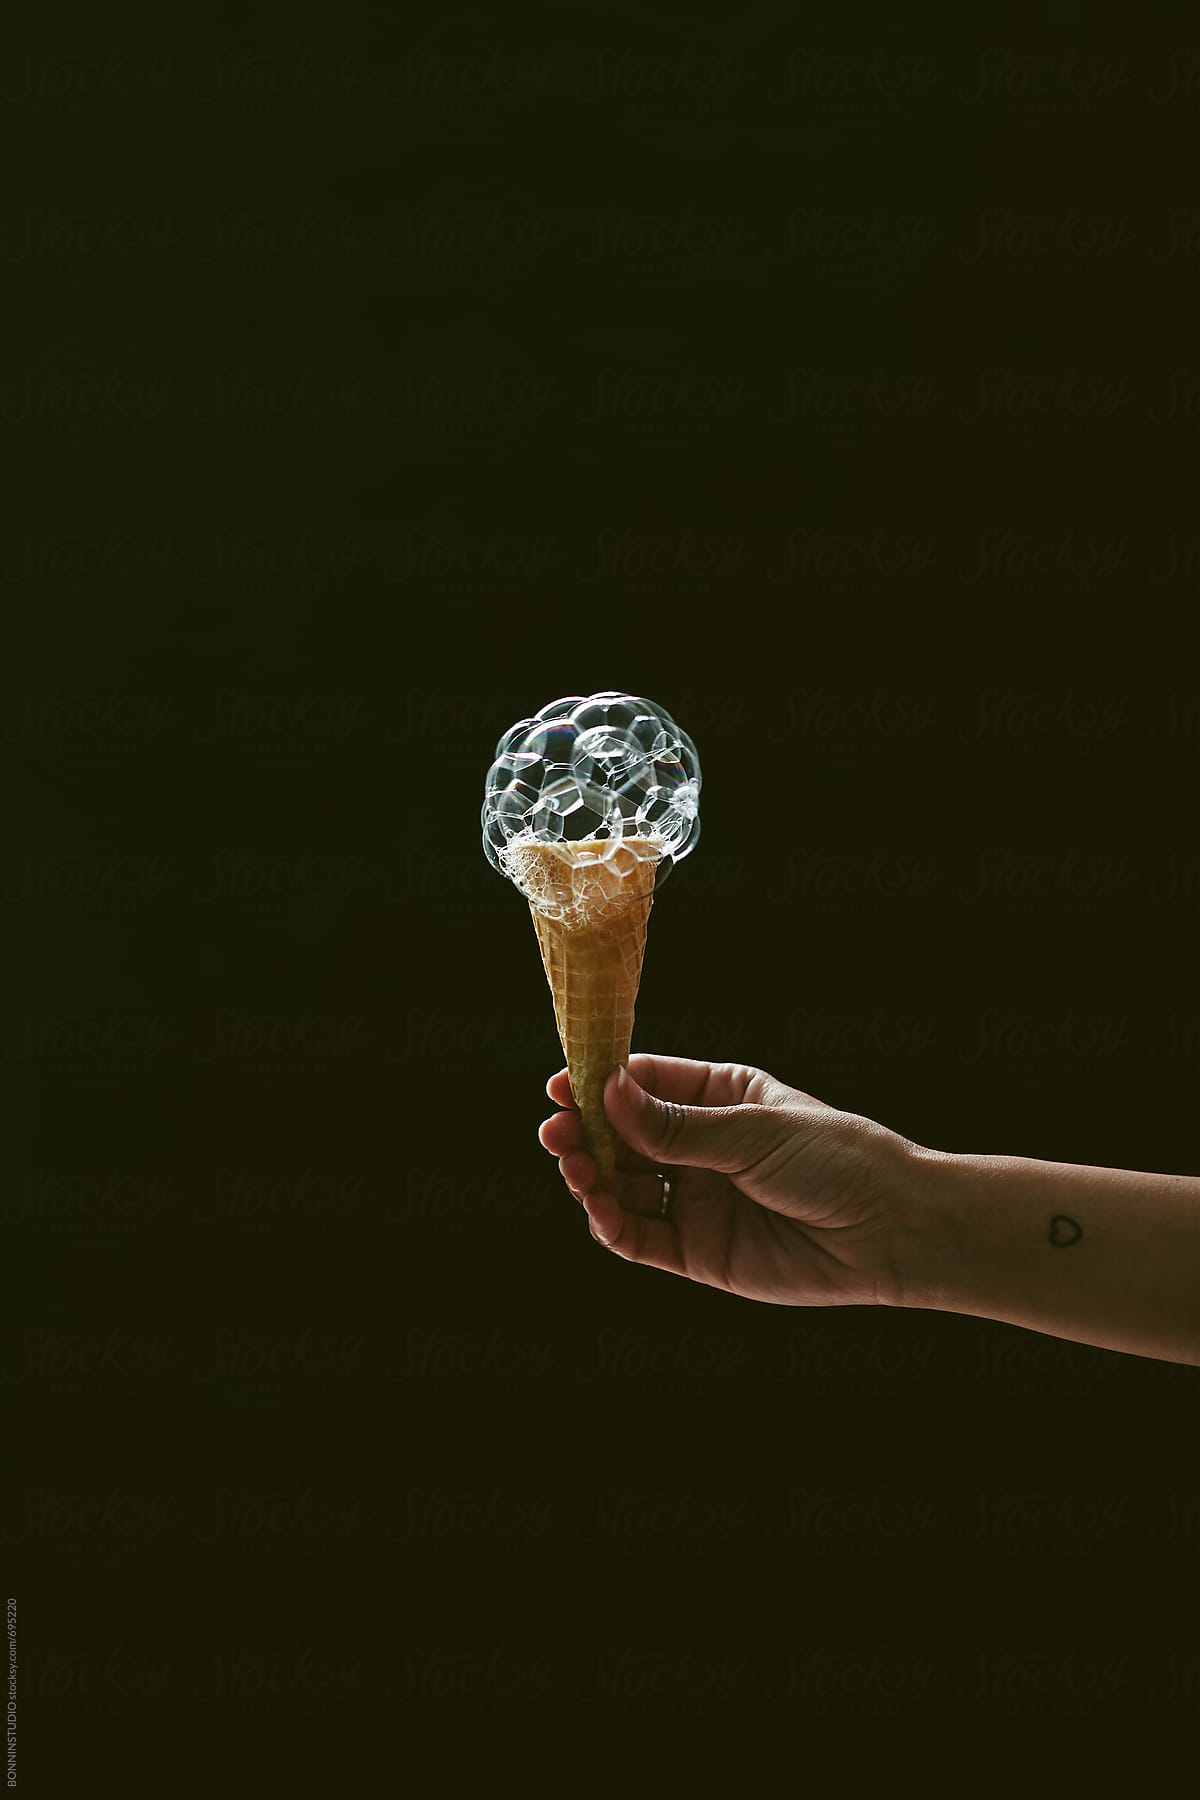 Hand holding a soap bubble ice cream on a black background.